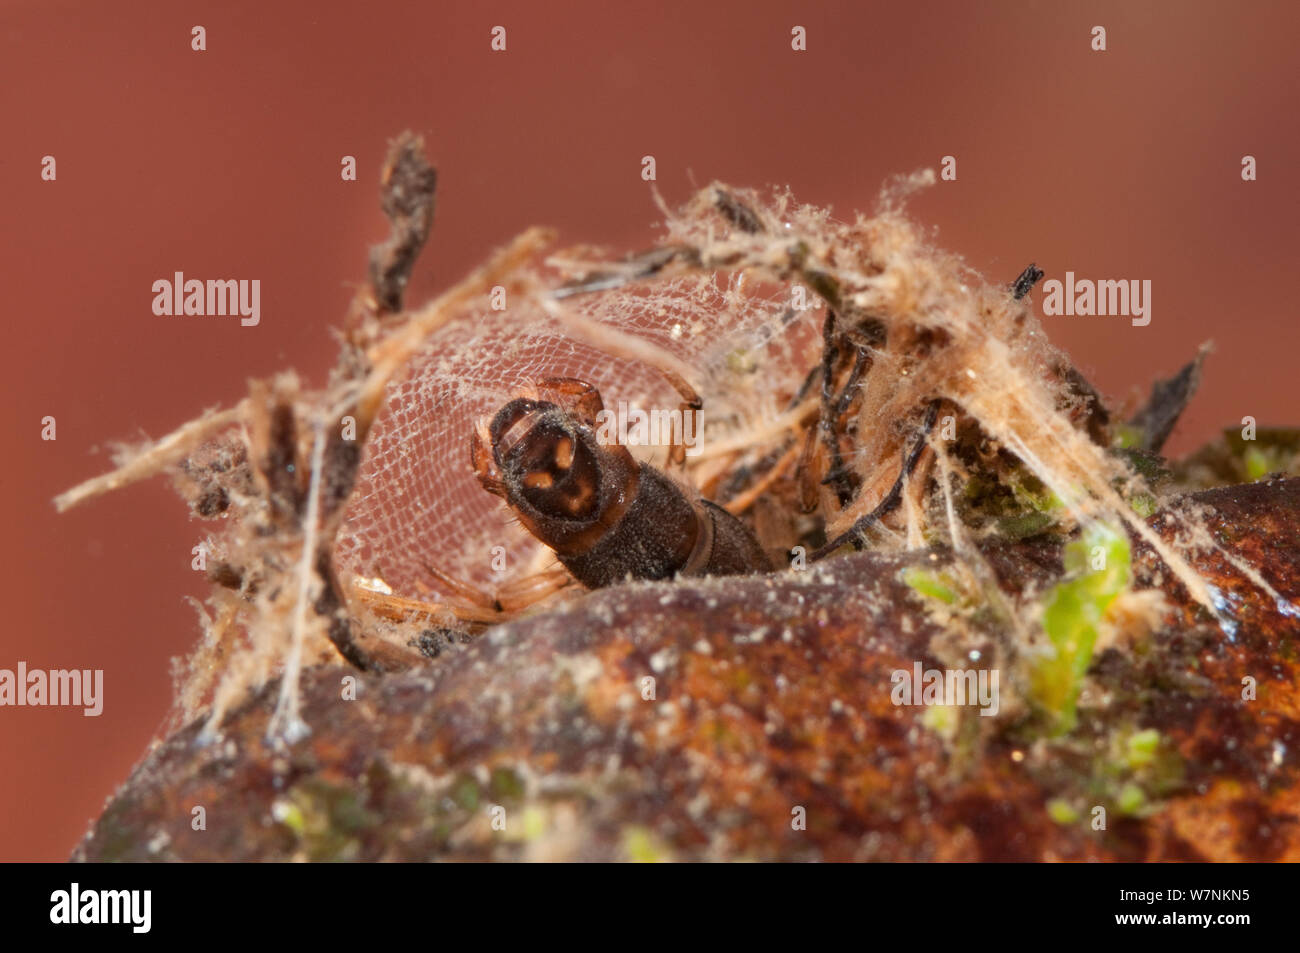 Net-spinning caddisfly larva (Trichoptera, Hydropsychidae) collecting organic debris from the trapping net of its shelter, Europe, May, controlled conditions Stock Photo